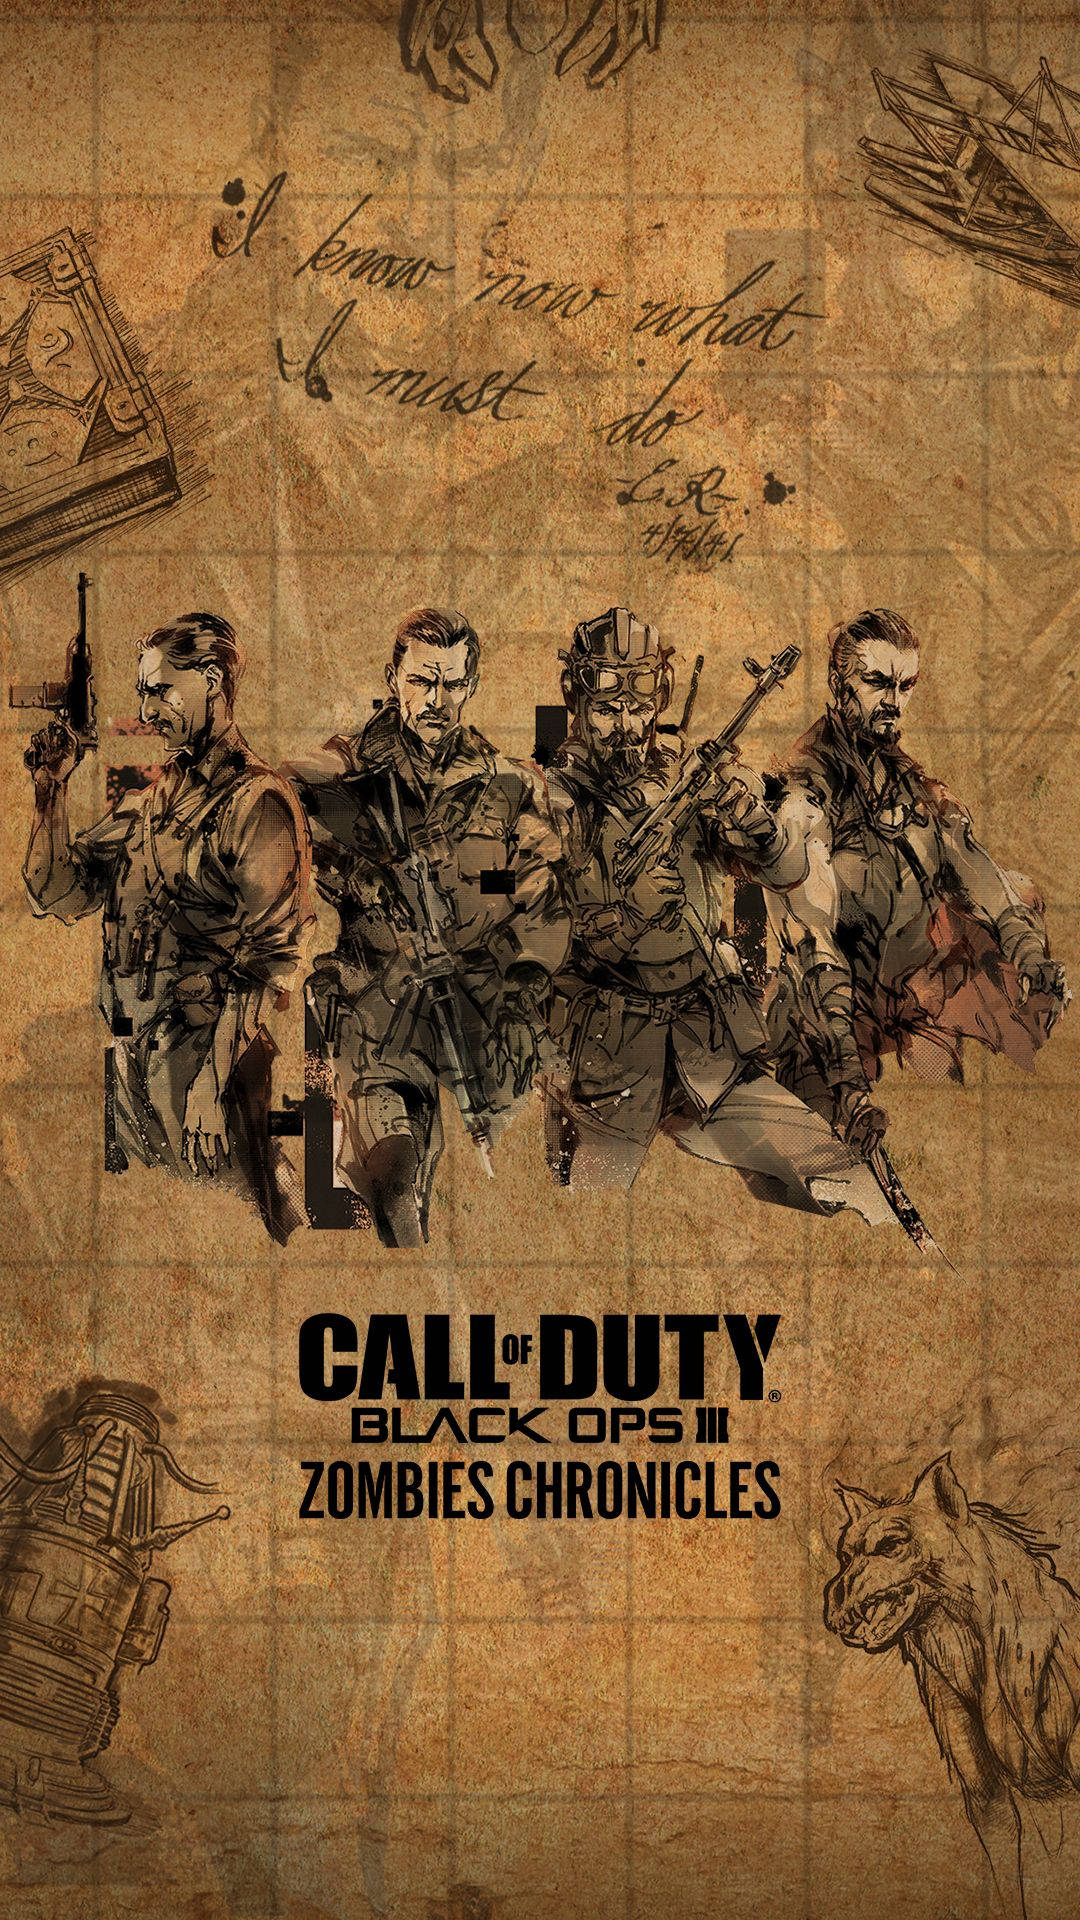 Free Black Ops 4 Wallpaper Downloads, [100+] Black Ops 4 Wallpapers for  FREE 